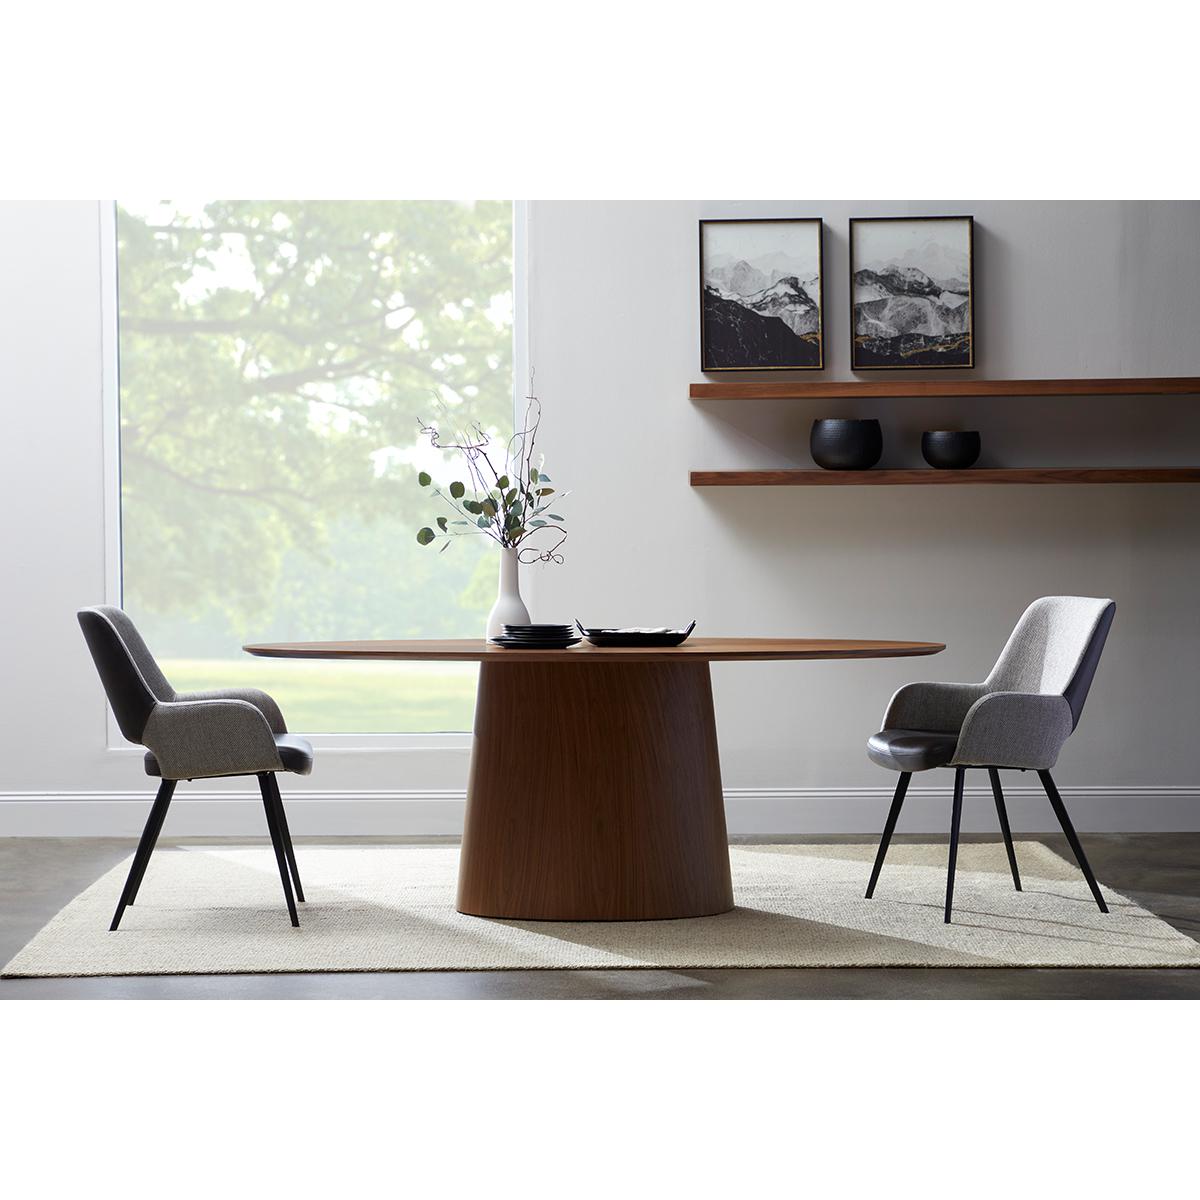 Serena Oval Dining Table 79"